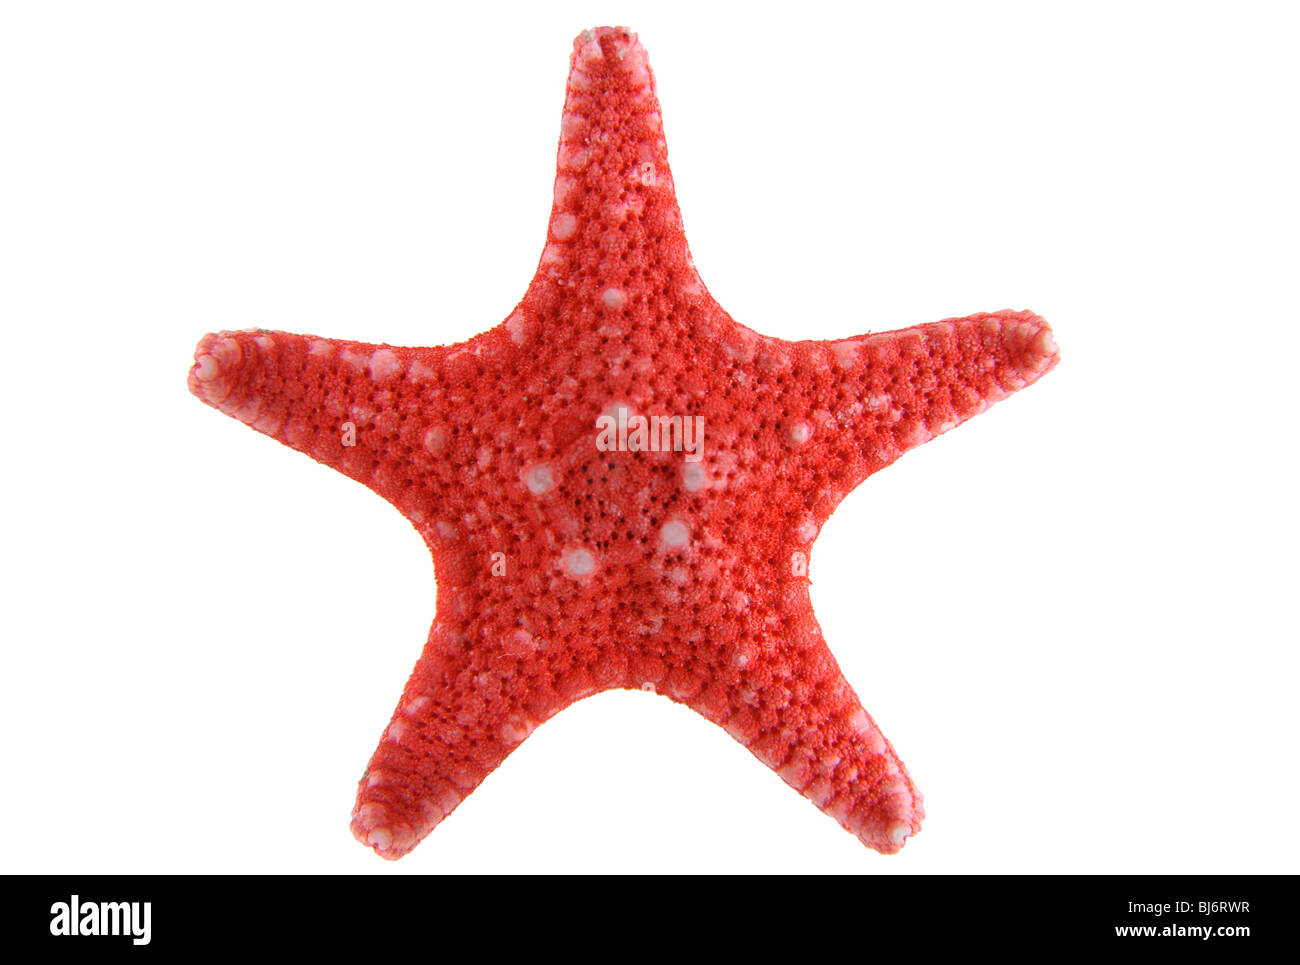 Red starfish isolated on a white background close-up Stock Photo